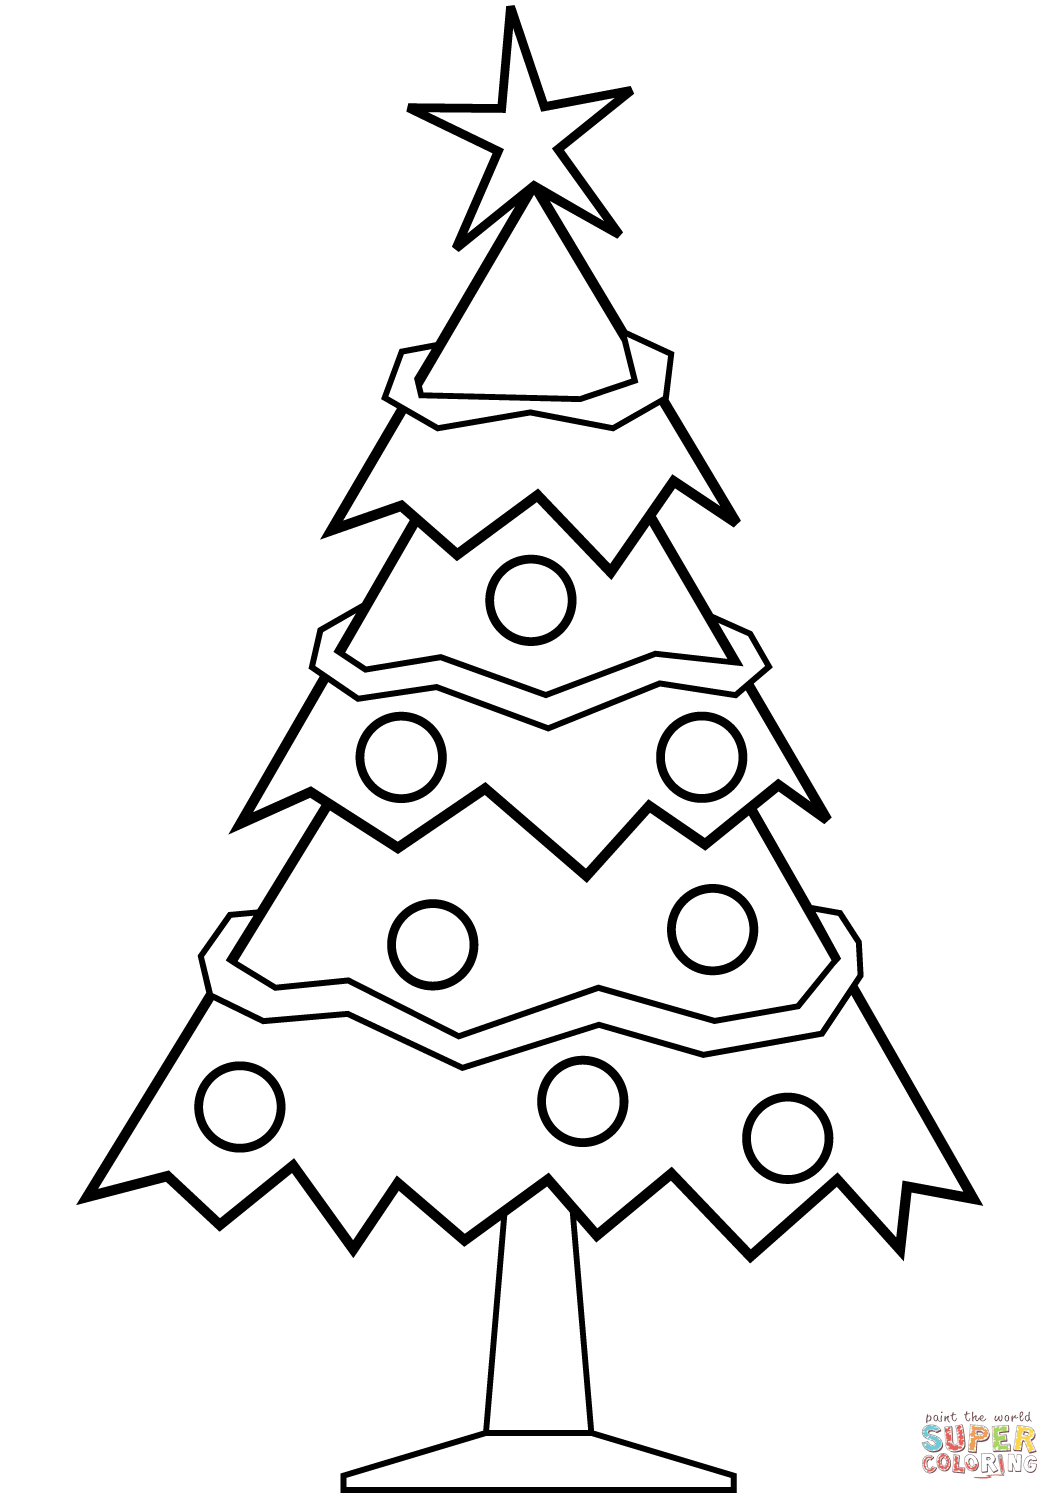 Christmas Tree Coloring Pages Image Picture Photo Wallpaper 16